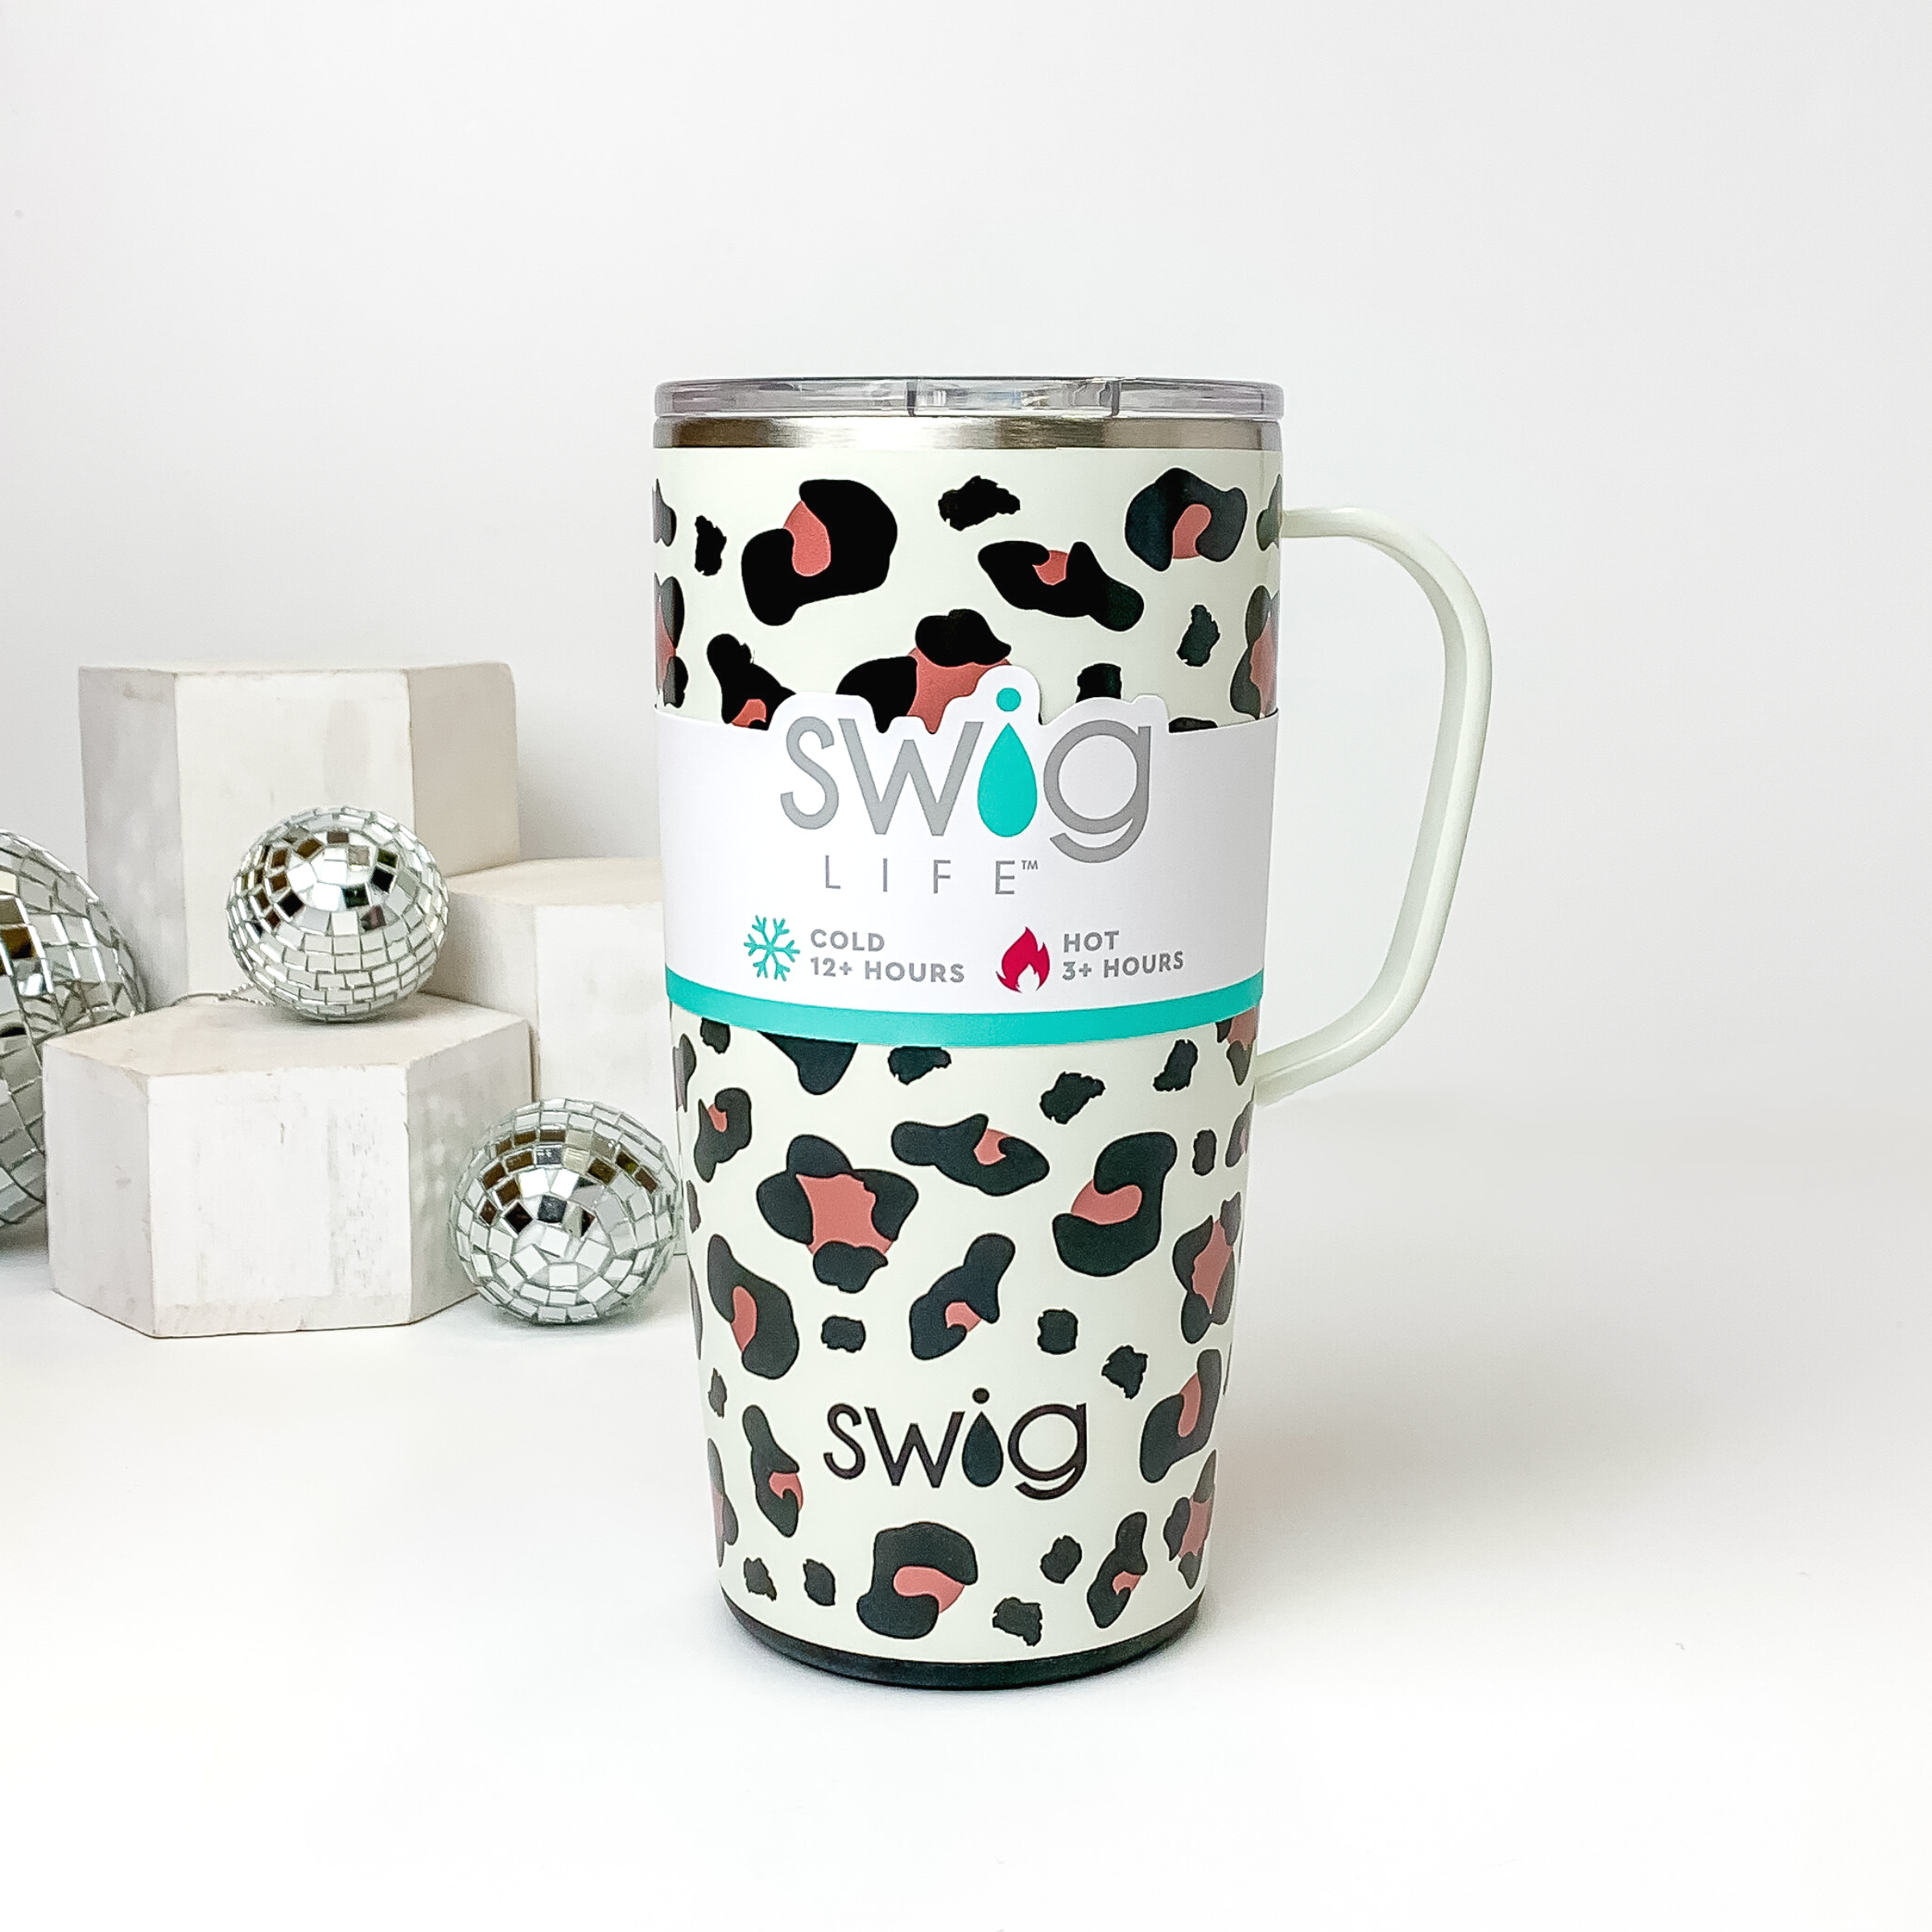 Ivory mug with a clear lid and ivory handle. This mug has a black and rose gold leopard print. this mug is pictured on a white background with white blocks and disco balls on the left side of the picture. 